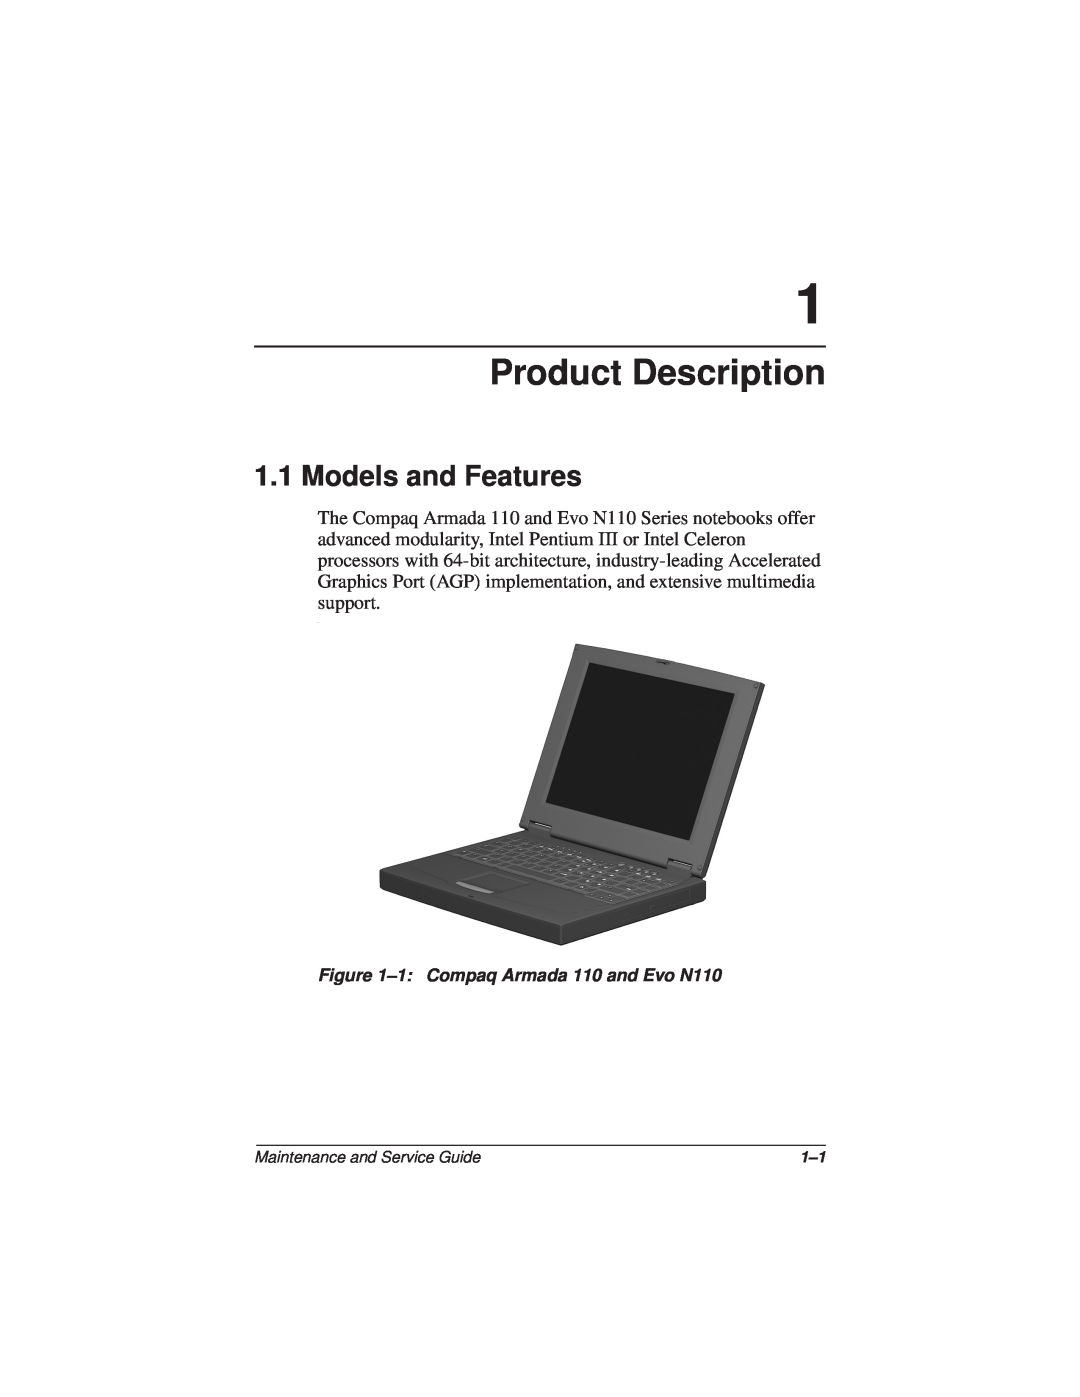 Compaq manual Product Description, Models and Features, 1 Compaq Armada 110 and Evo N110, Maintenance and Service Guide 